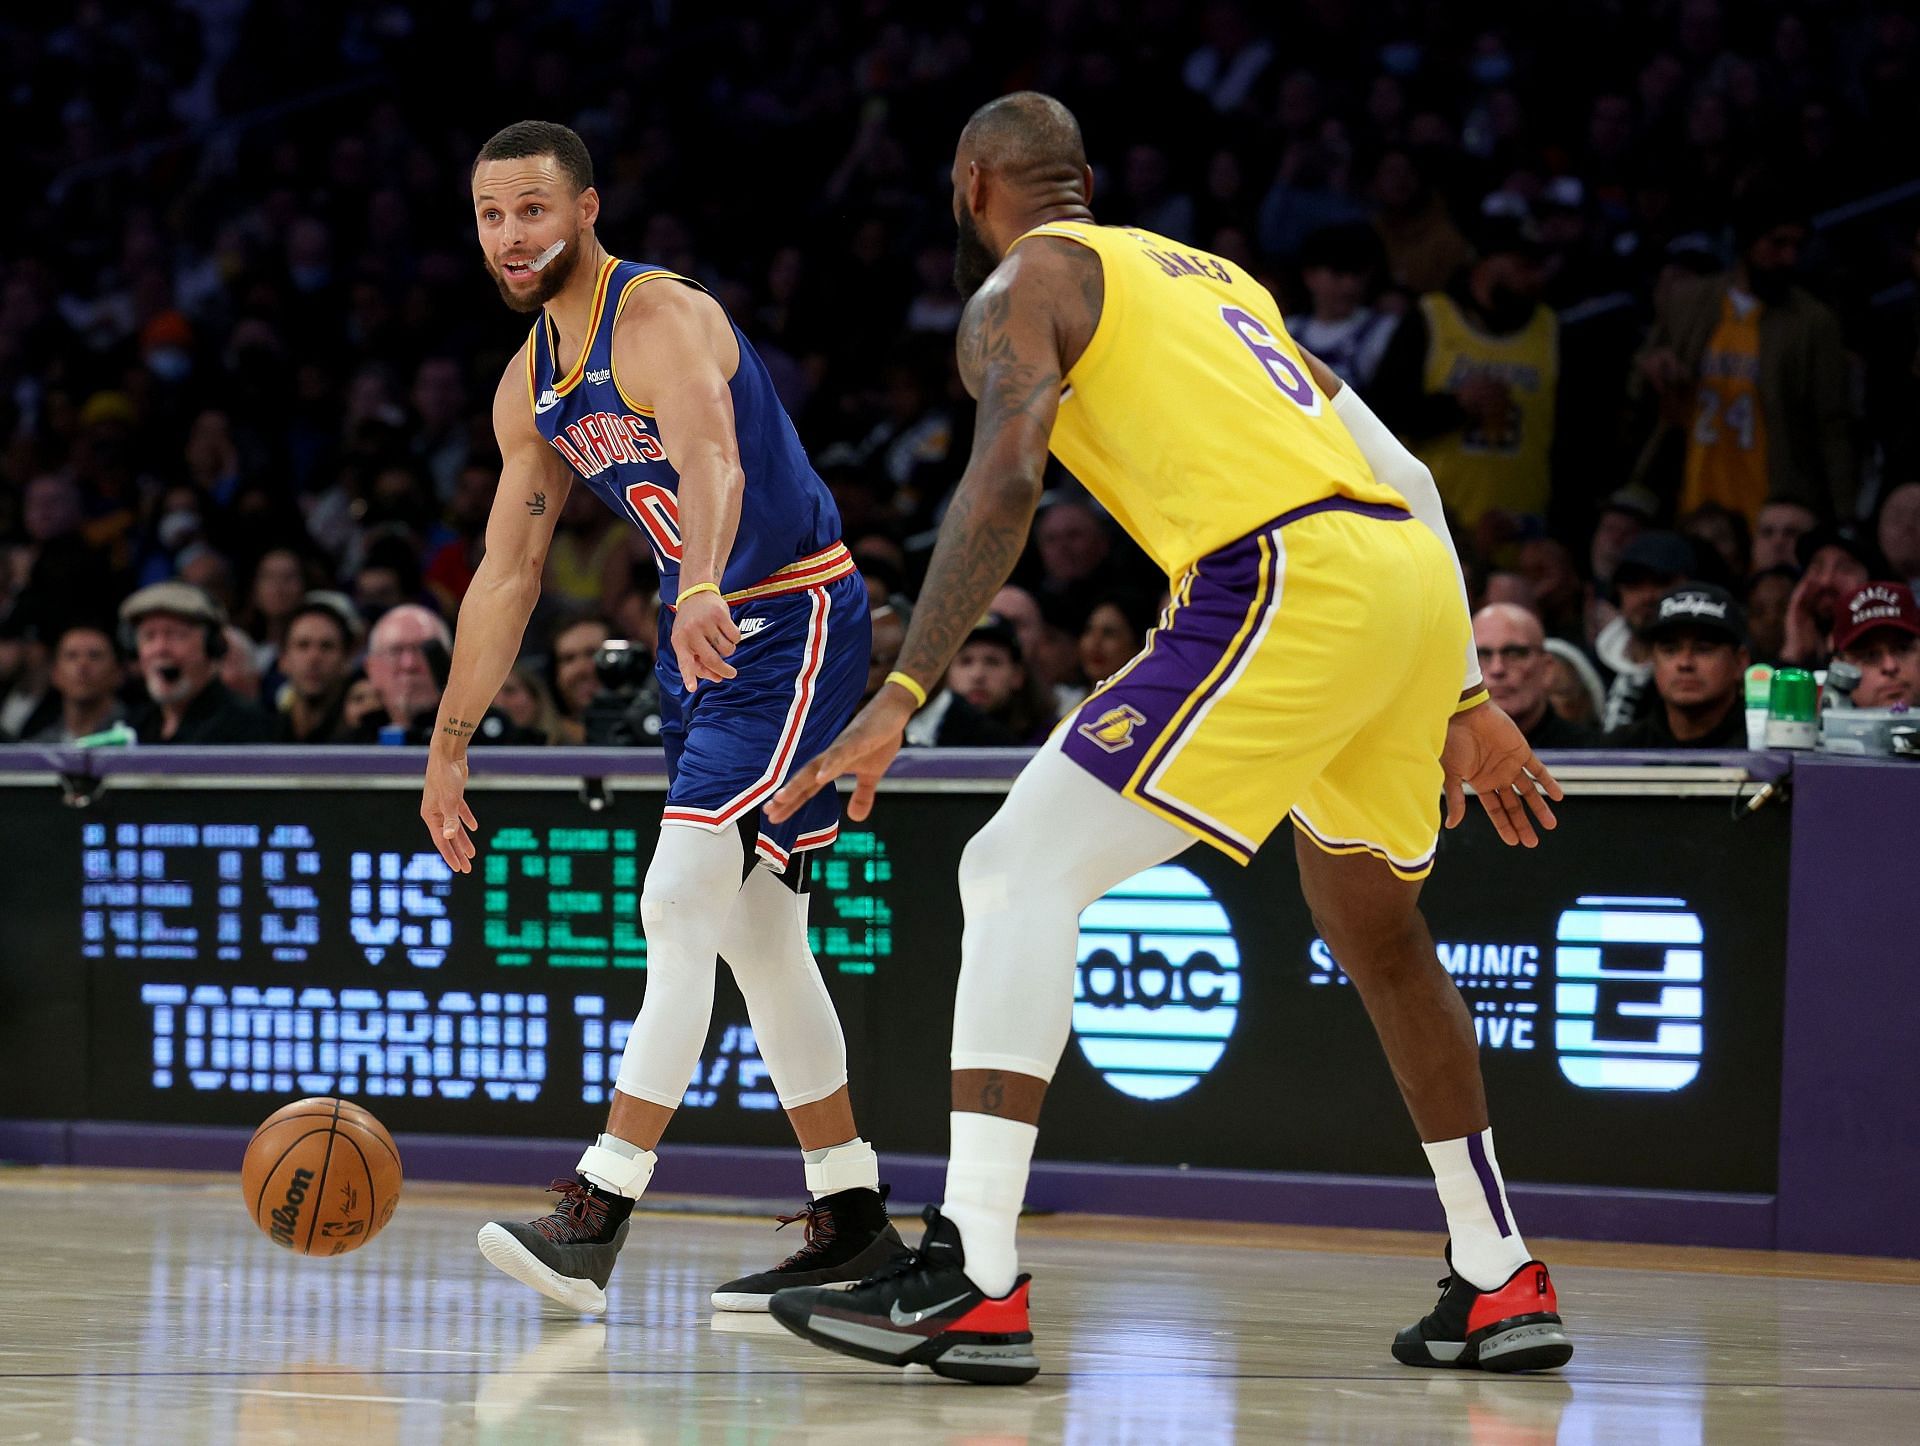 Stephen Curry of the Golden State Warriors dribbles in front of LeBron James of the Los Angeles Lakers